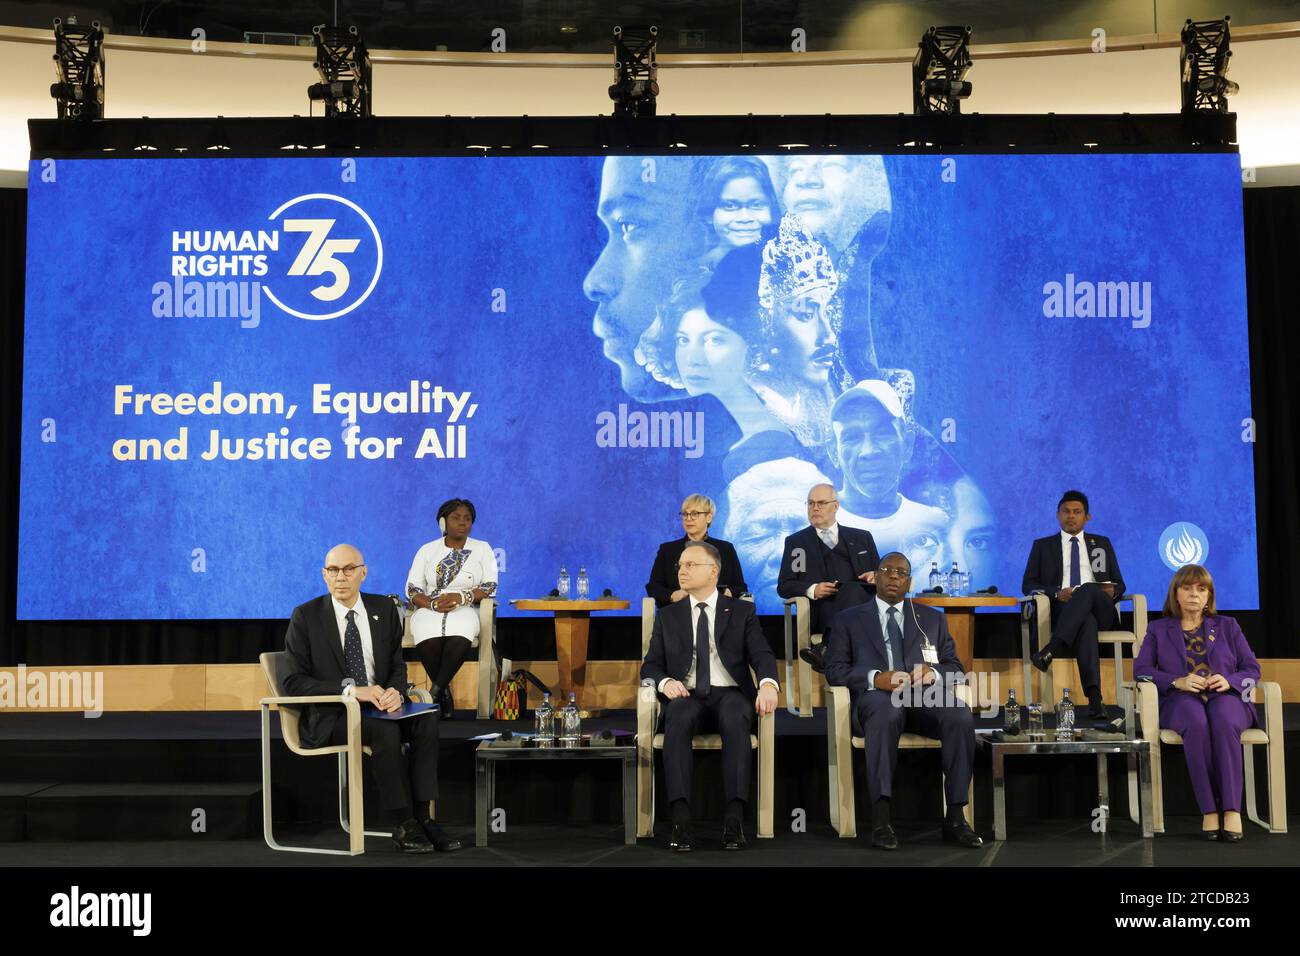 First row from left to right: U.N. High Commissioner for Human